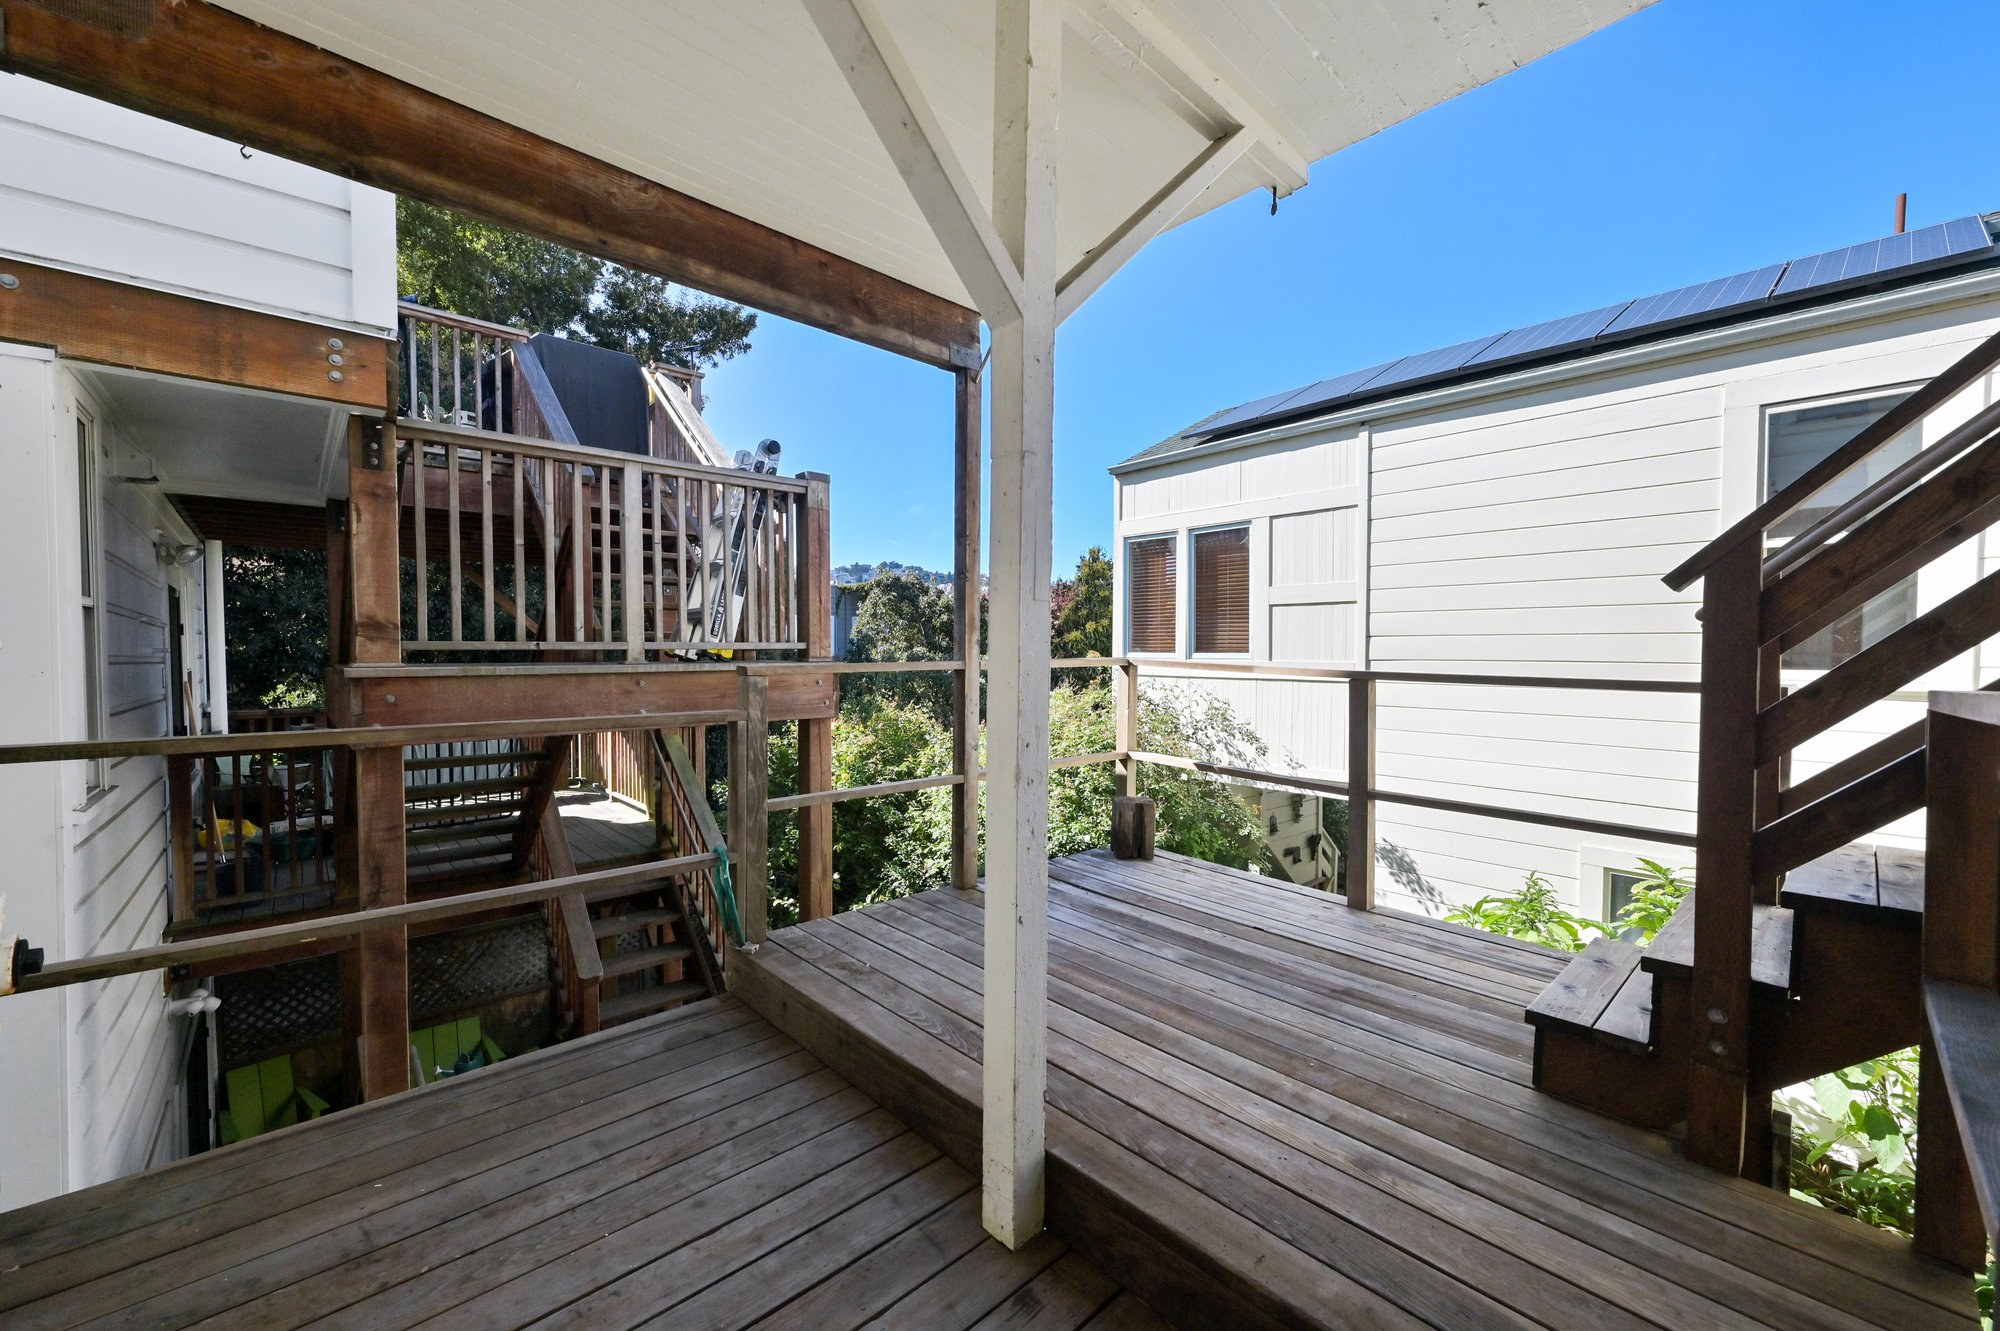 Property Photo: Deck with overhang and steps leading up